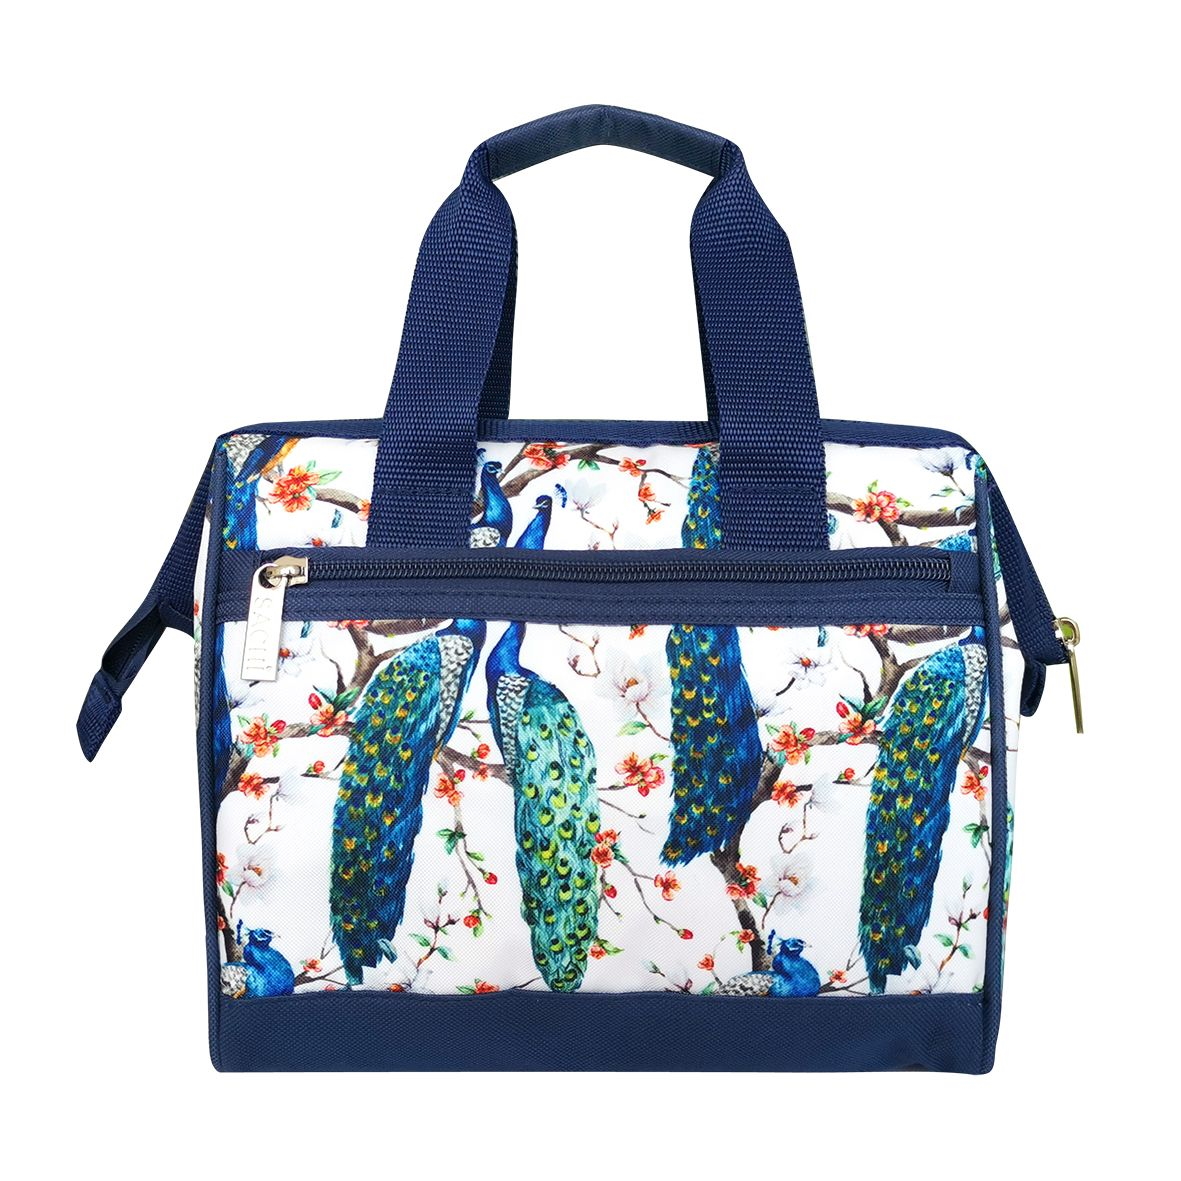 Sachi Style 34 Insulated Lunch Bag 3 -PEACOCKS